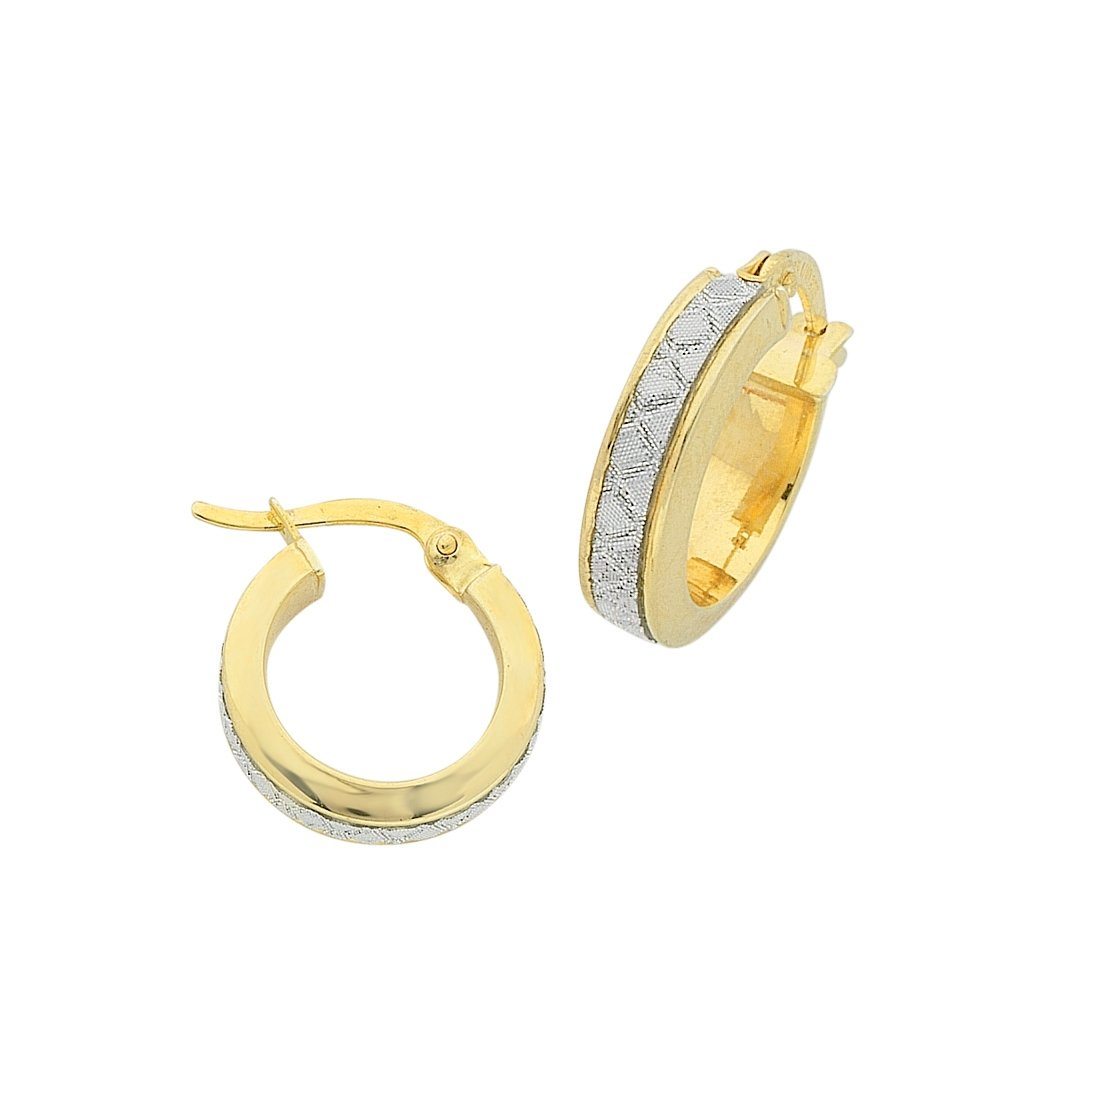 Bevilles 9ct Yellow Gold Silver Infused Stardust Criss Cross Hoop Earrings